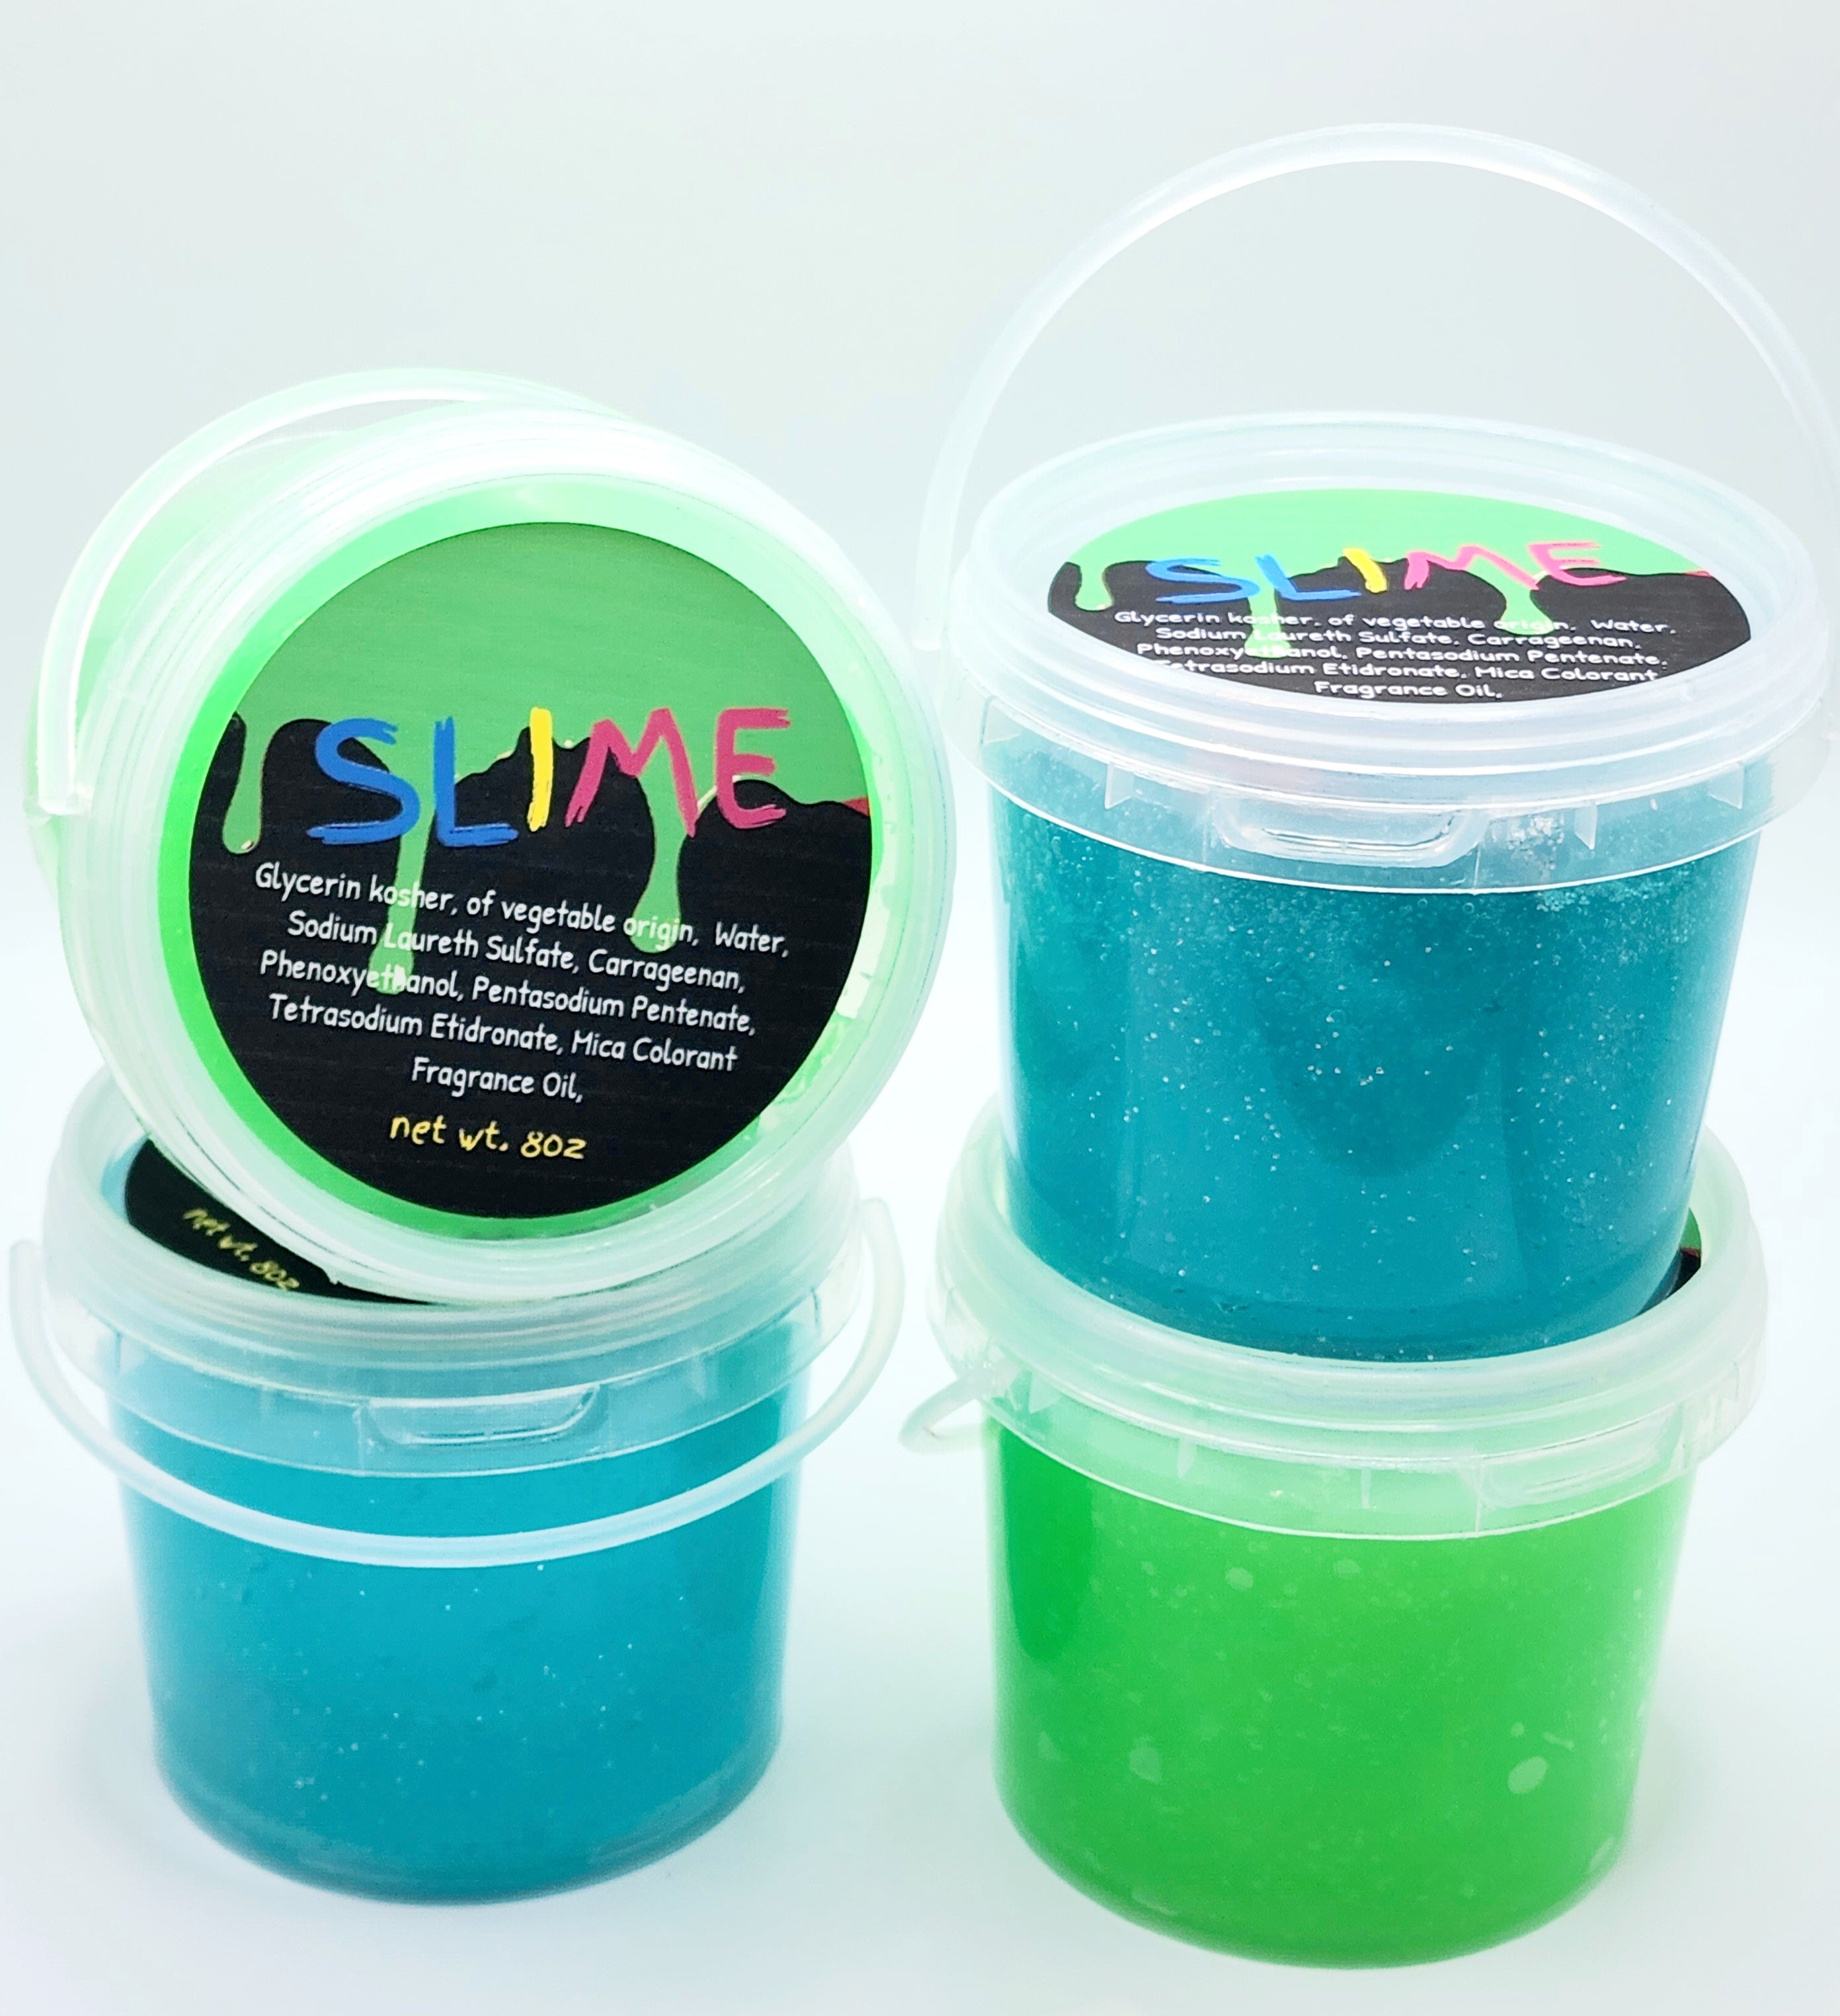  Tub Works Bath Slime Kids Soap & Slime Body Wash, Variety Pack, Nontoxic, Stretchy, Squishy Slime Soap & Gooey, Playful Body Wash for  Kids Bath